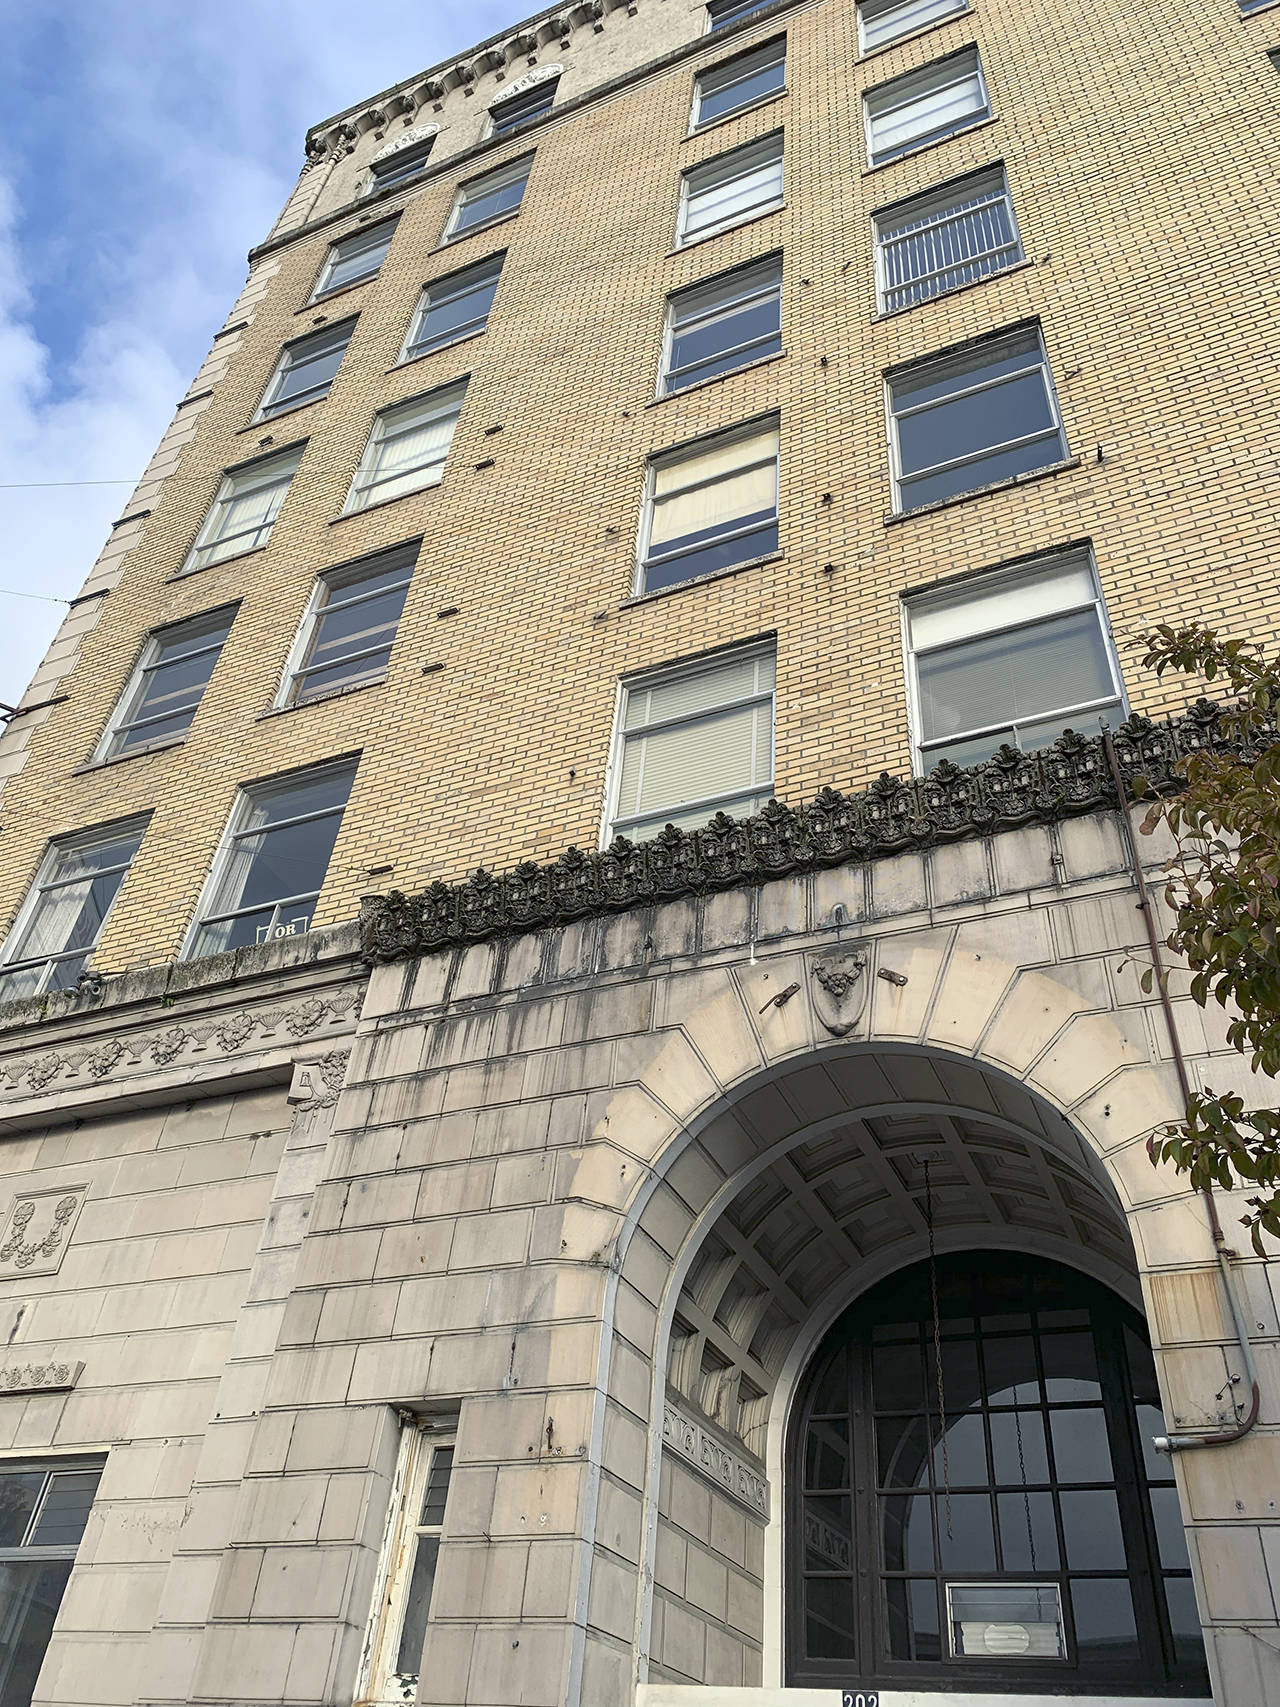 Kat Bryant | Grays Harbor News Group The Becker Building, at 200 E. Wishkah St., was purchased by Oregon real estate mogul Terry Emmertin in October for $675,000. The downtown office building with a penthouse is Aberdeen’s tallest, at seven stories.